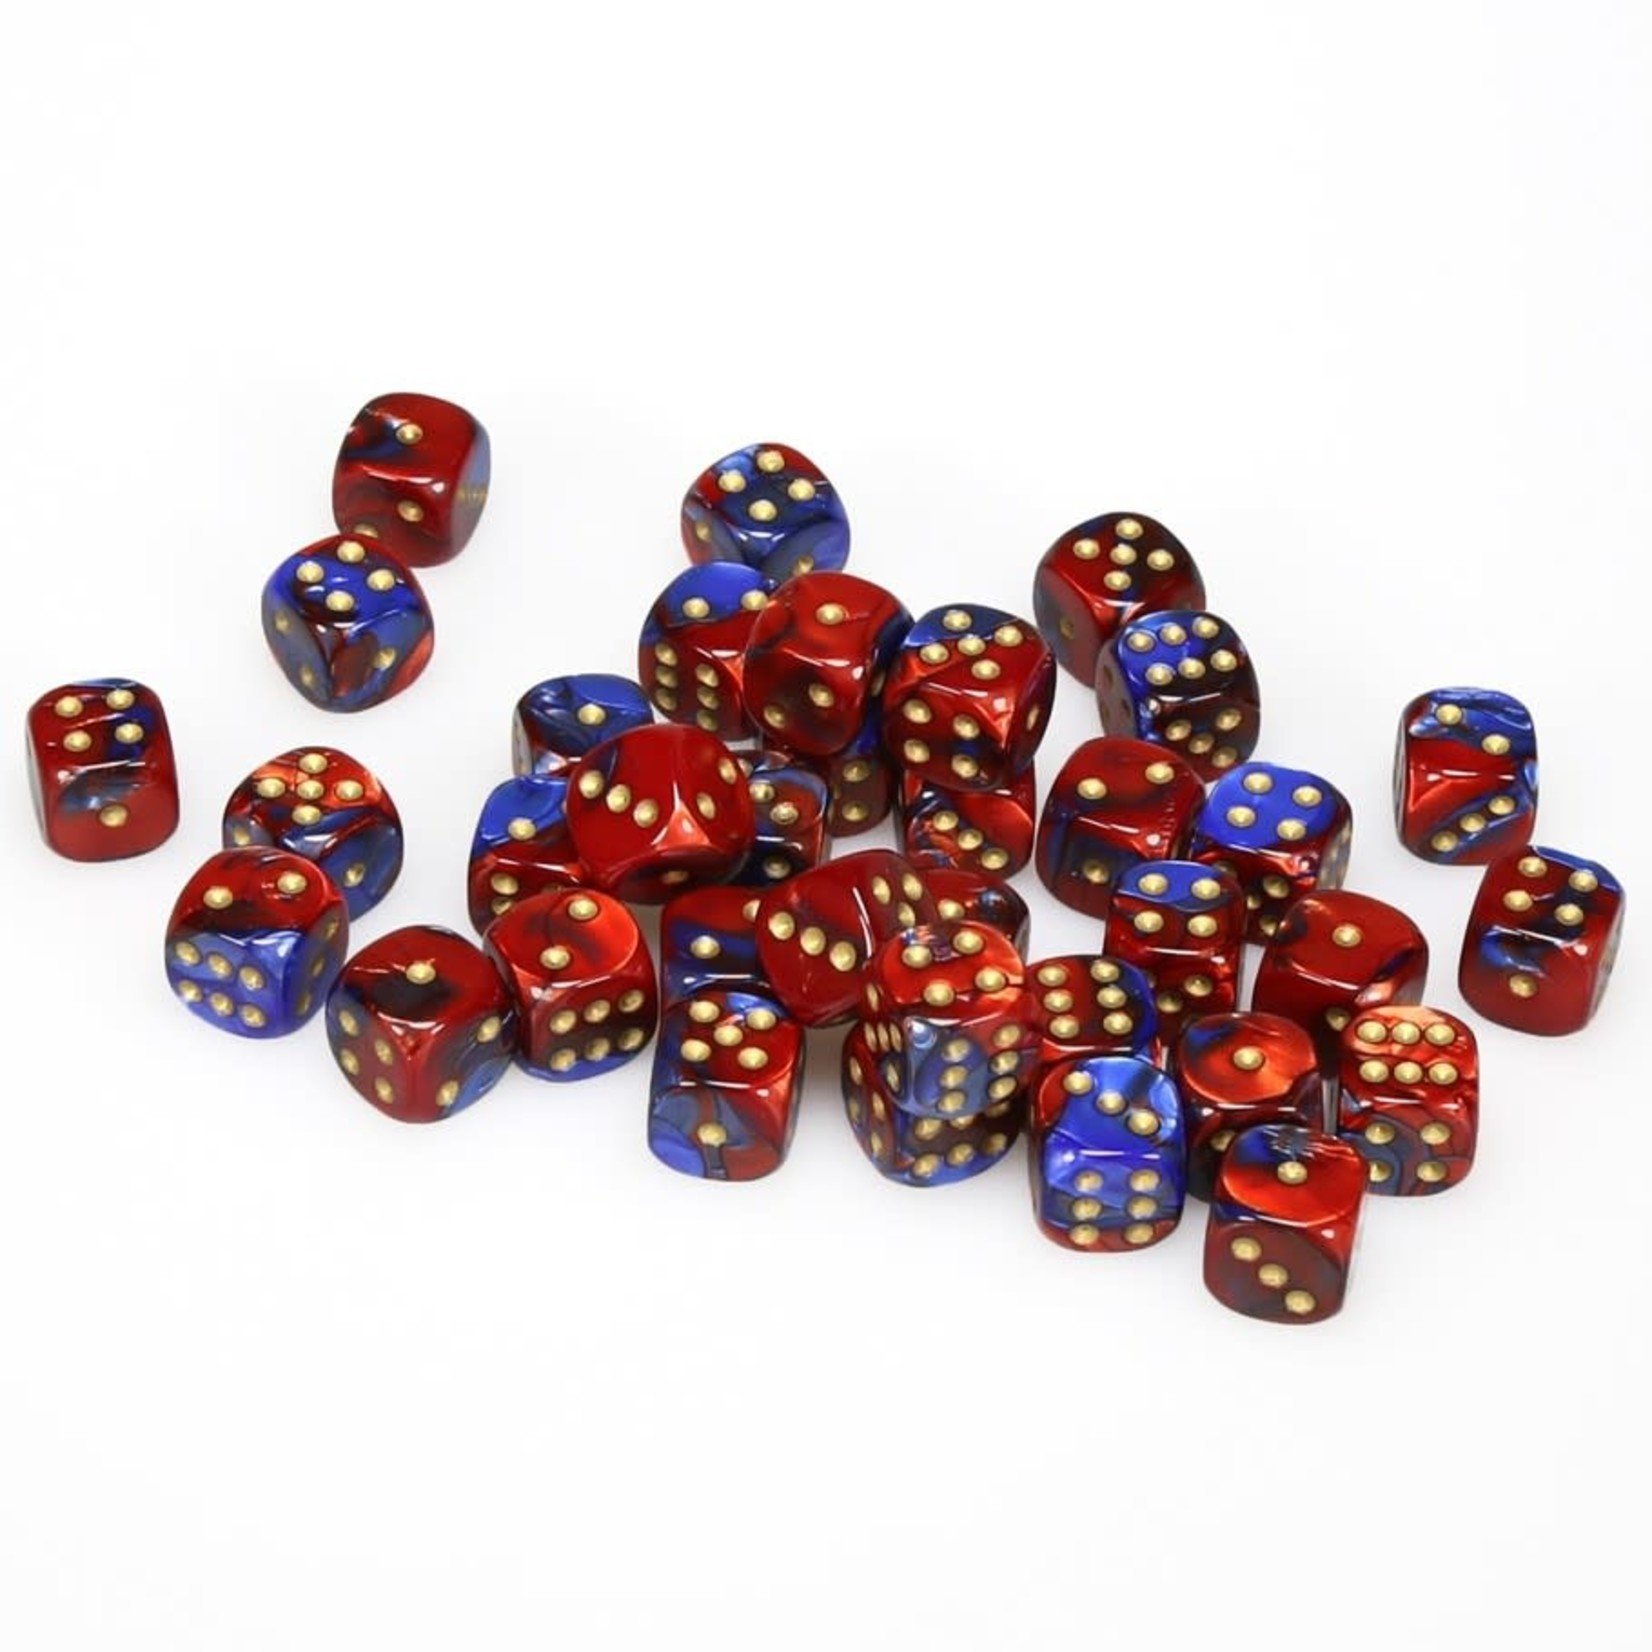 Chessex Chessex Gemini Blue / Red with Gold 12 mm d6 36 die set